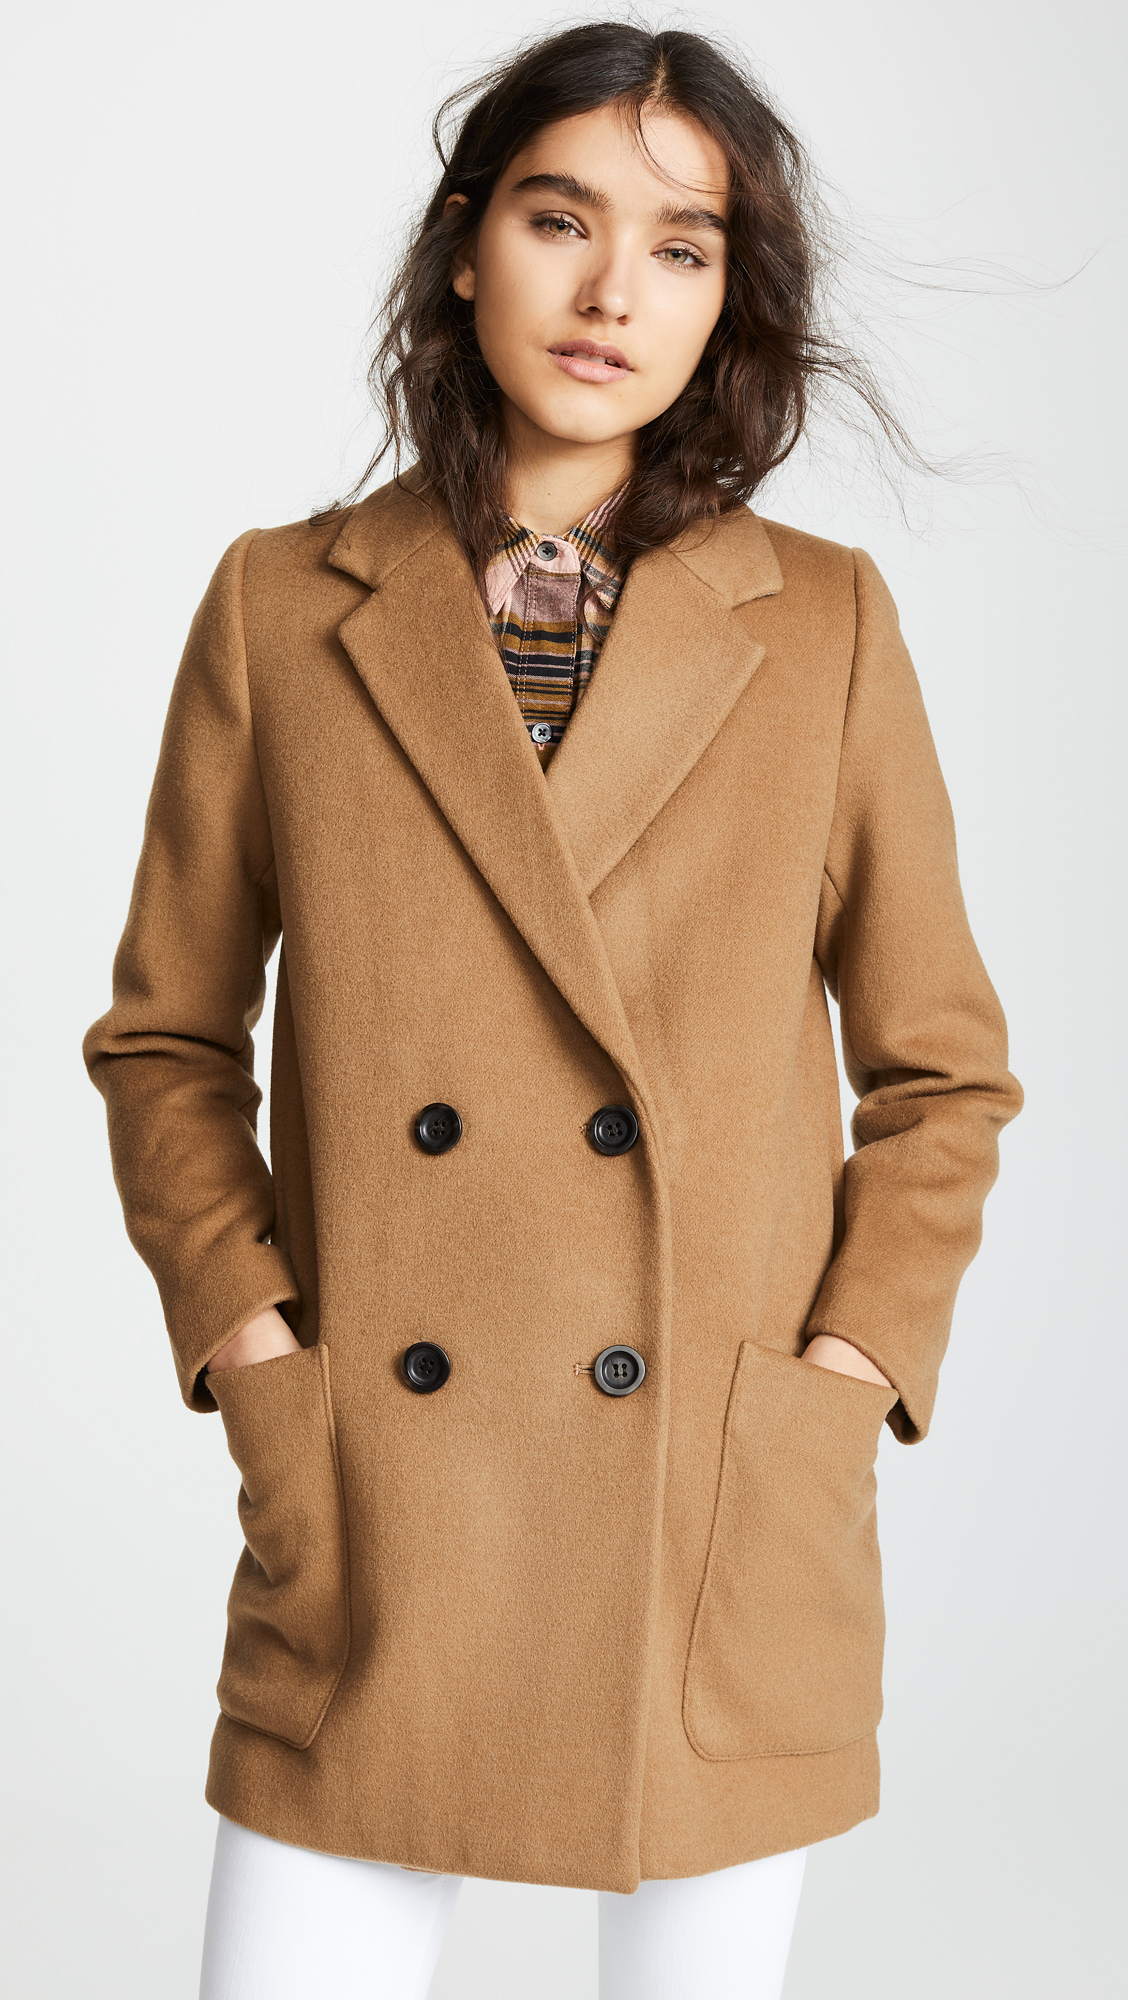 camel-double-breasted-blazer-womens-madewell-brown